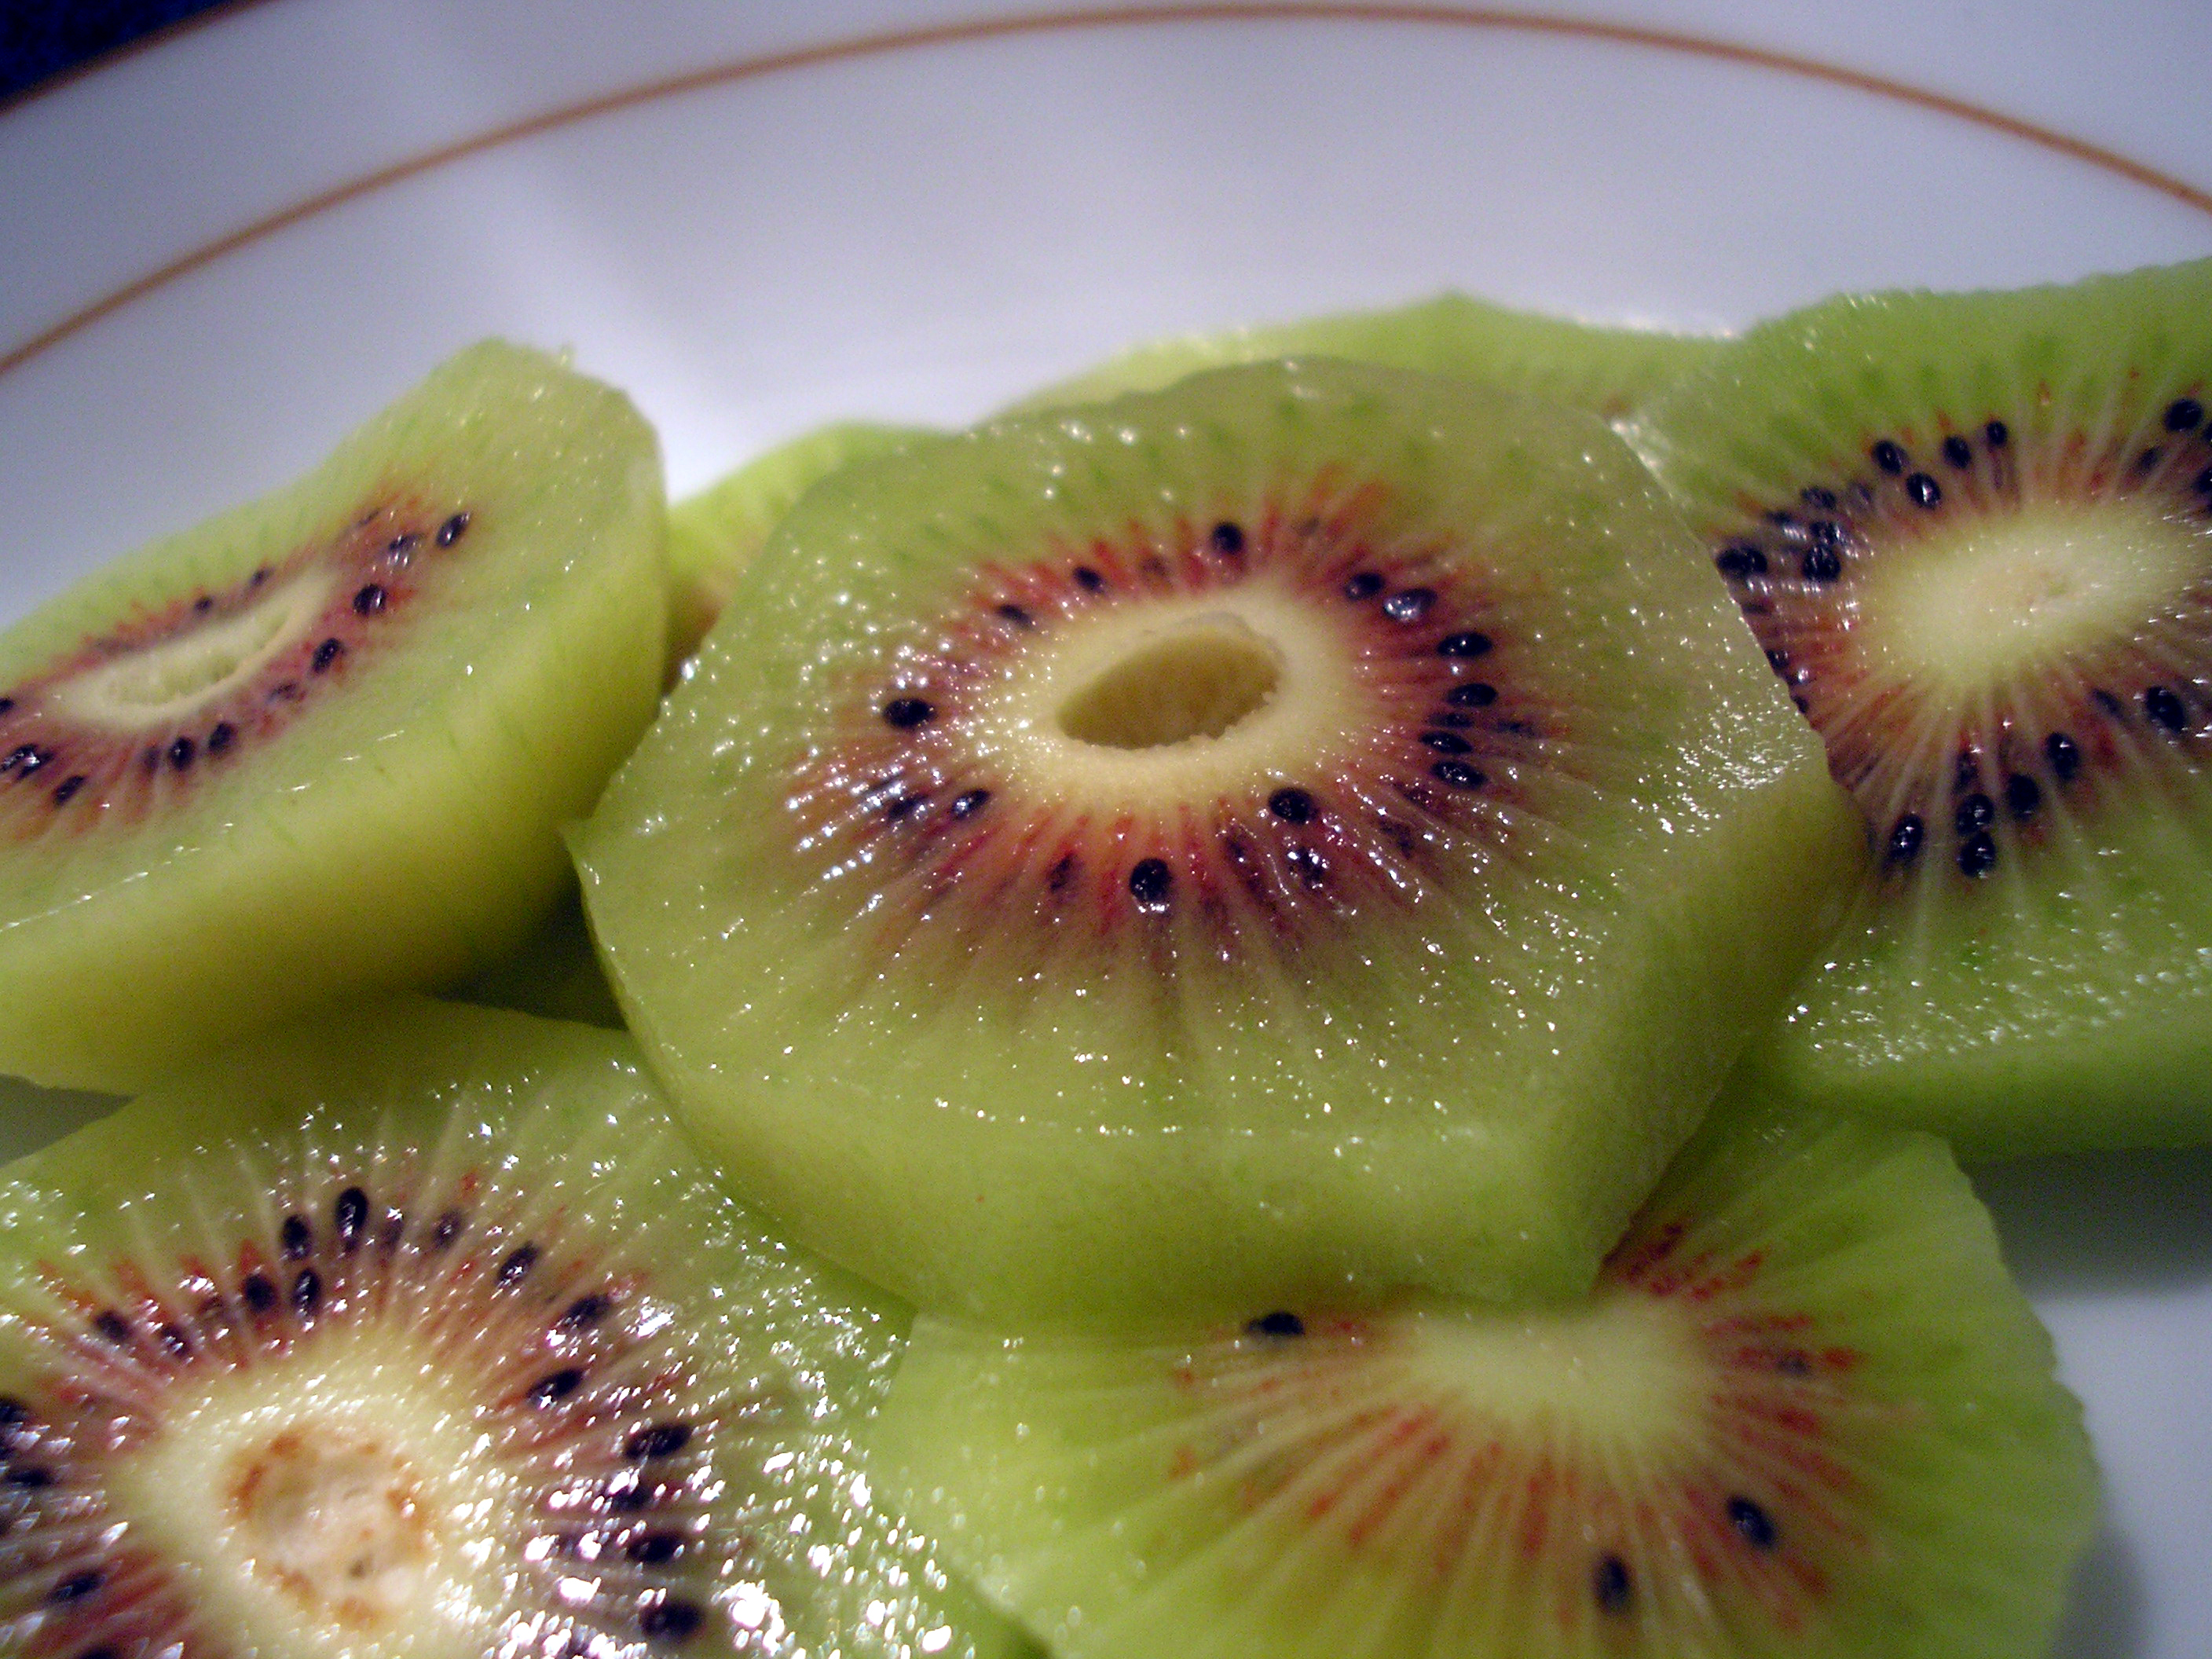 Golden kiwifruit with a red-ring. Photo taken on November 1, 2006.